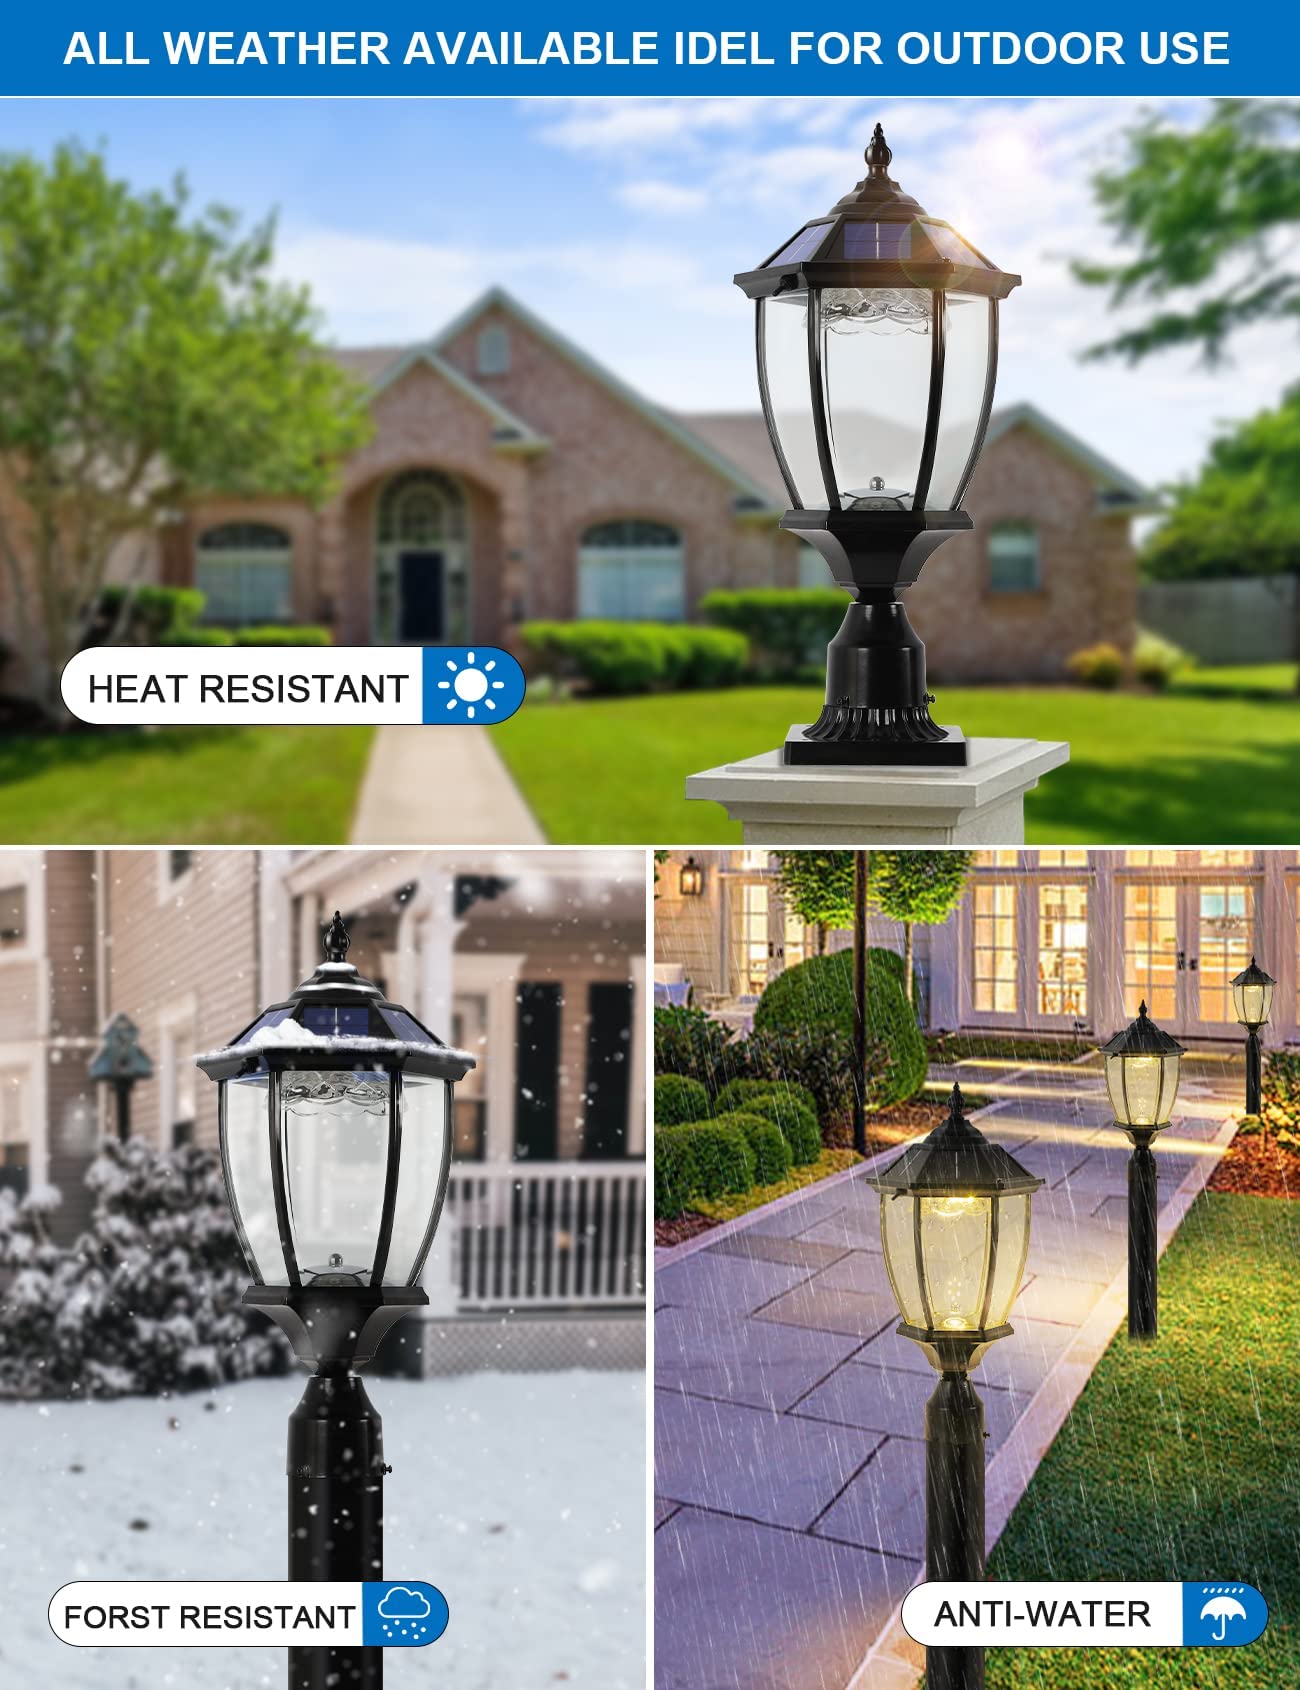 GYDZ Solar Post Lights Outdoor Solar Lamp Post Light for Gate Porch/Stone Pillar, Waterproof Decorative Solar Pillar Light Warm&Cool White, Oil-Rubbed Black Die Cast Aluminum Housing with Clear Glass